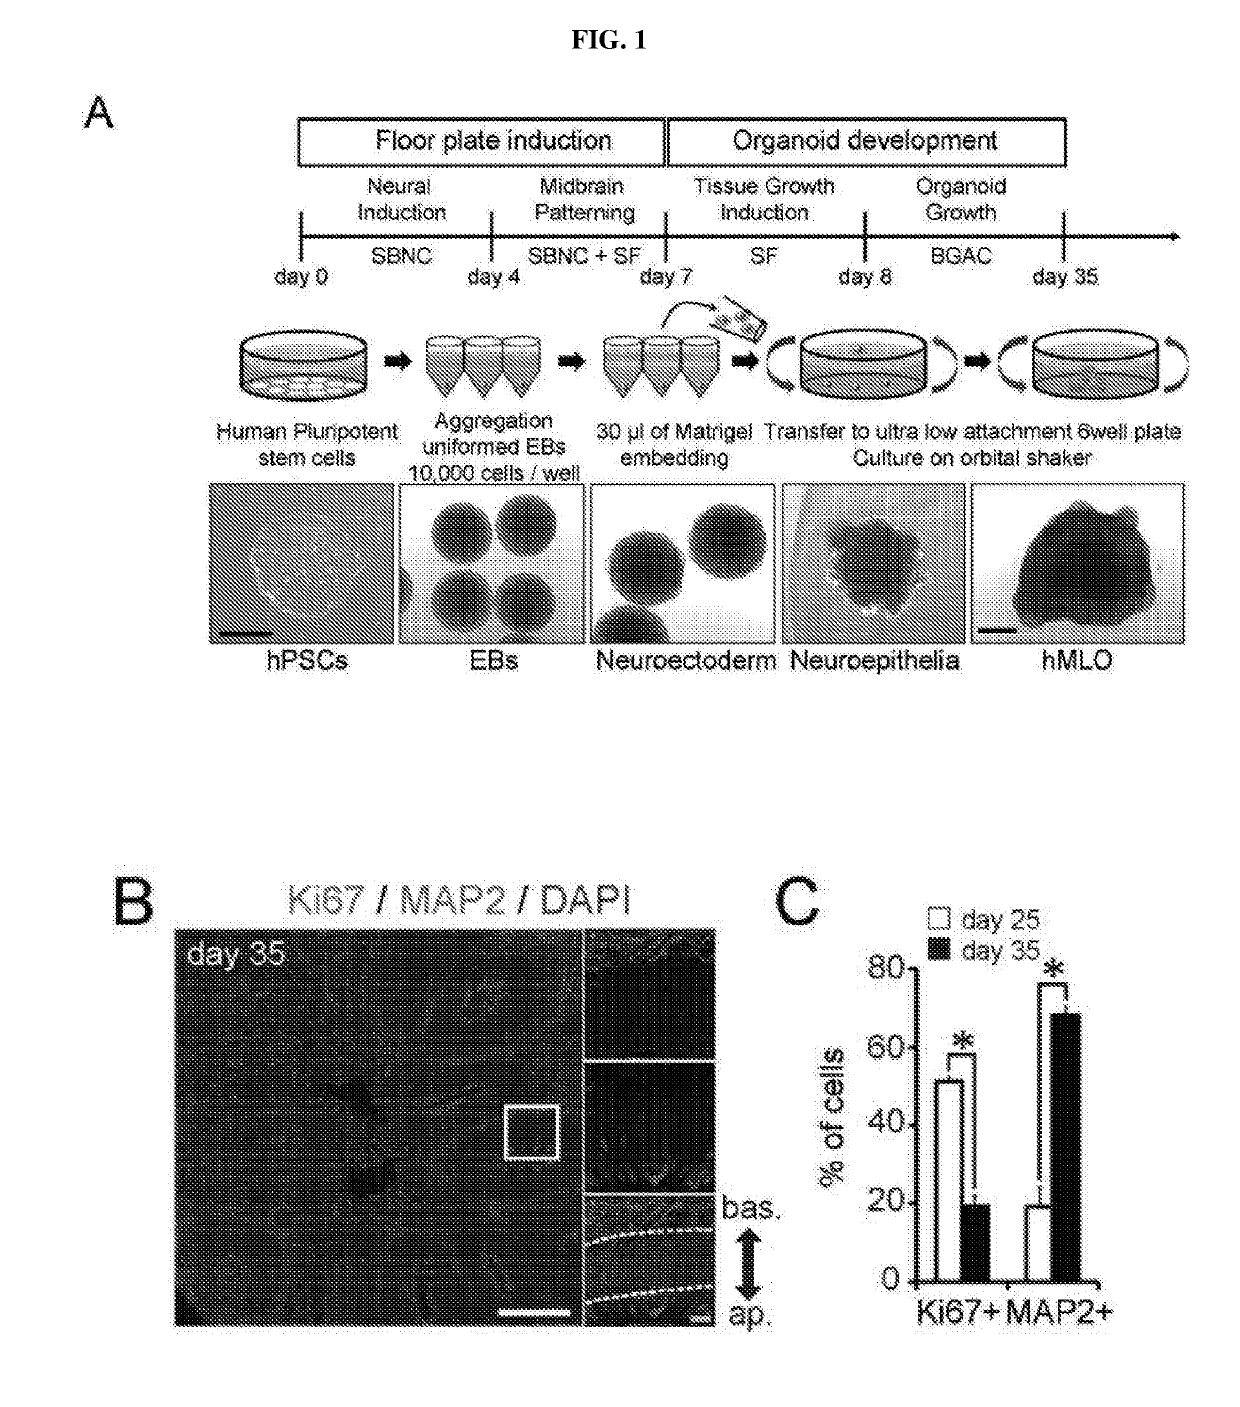 Generation of midbrain-specific organoids from human pluripotent stem cells